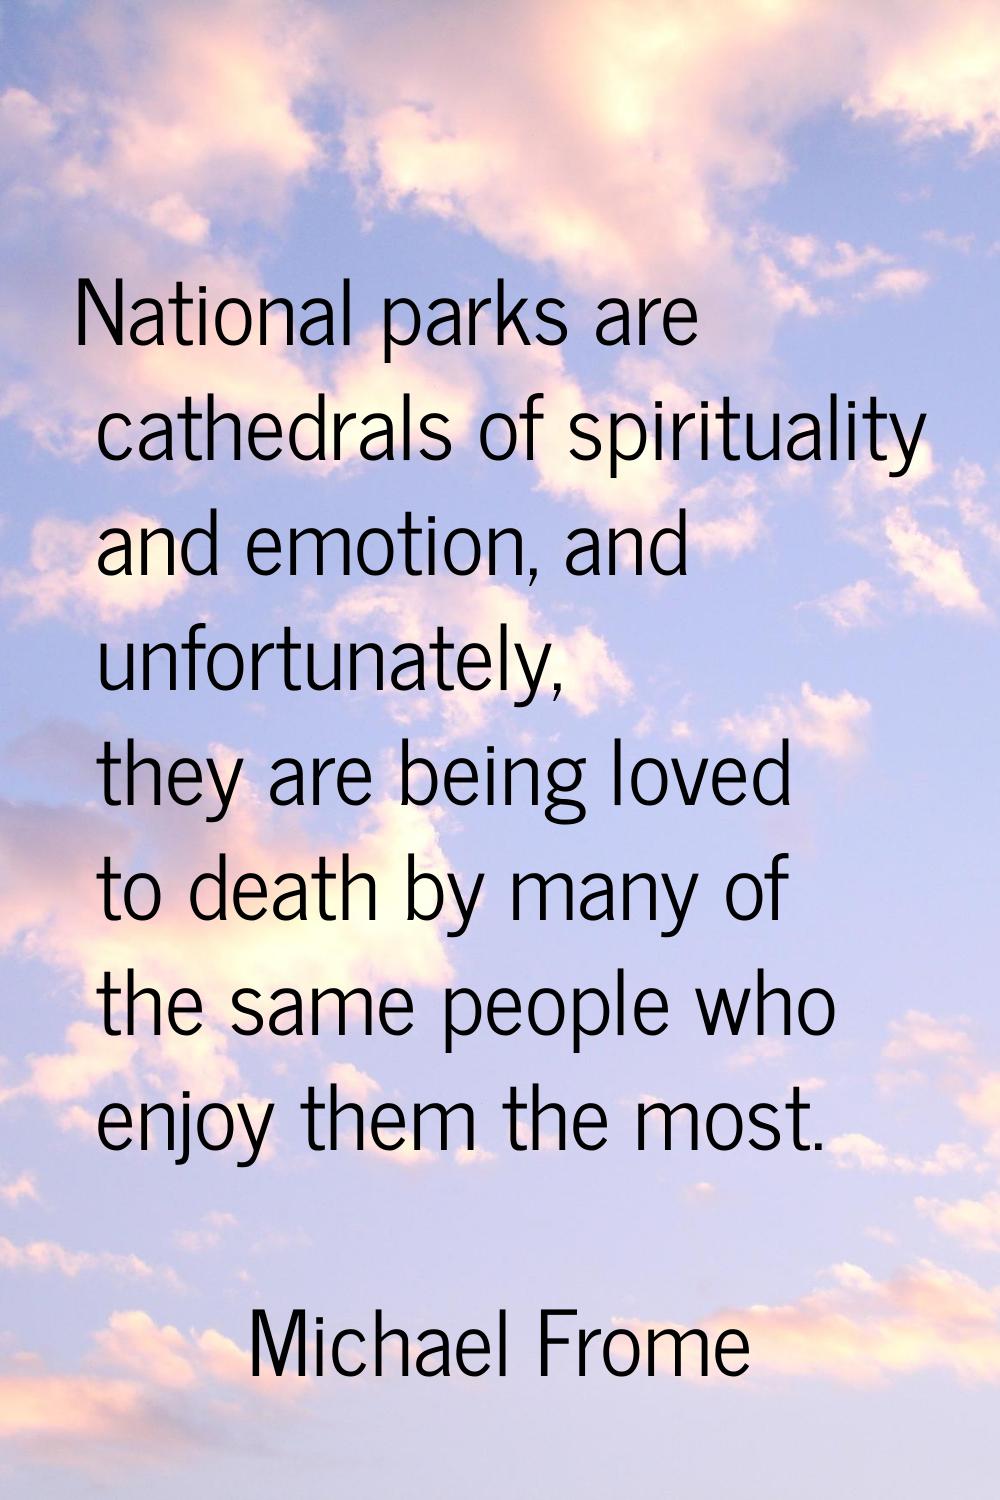 National parks are cathedrals of spirituality and emotion, and unfortunately, they are being loved 